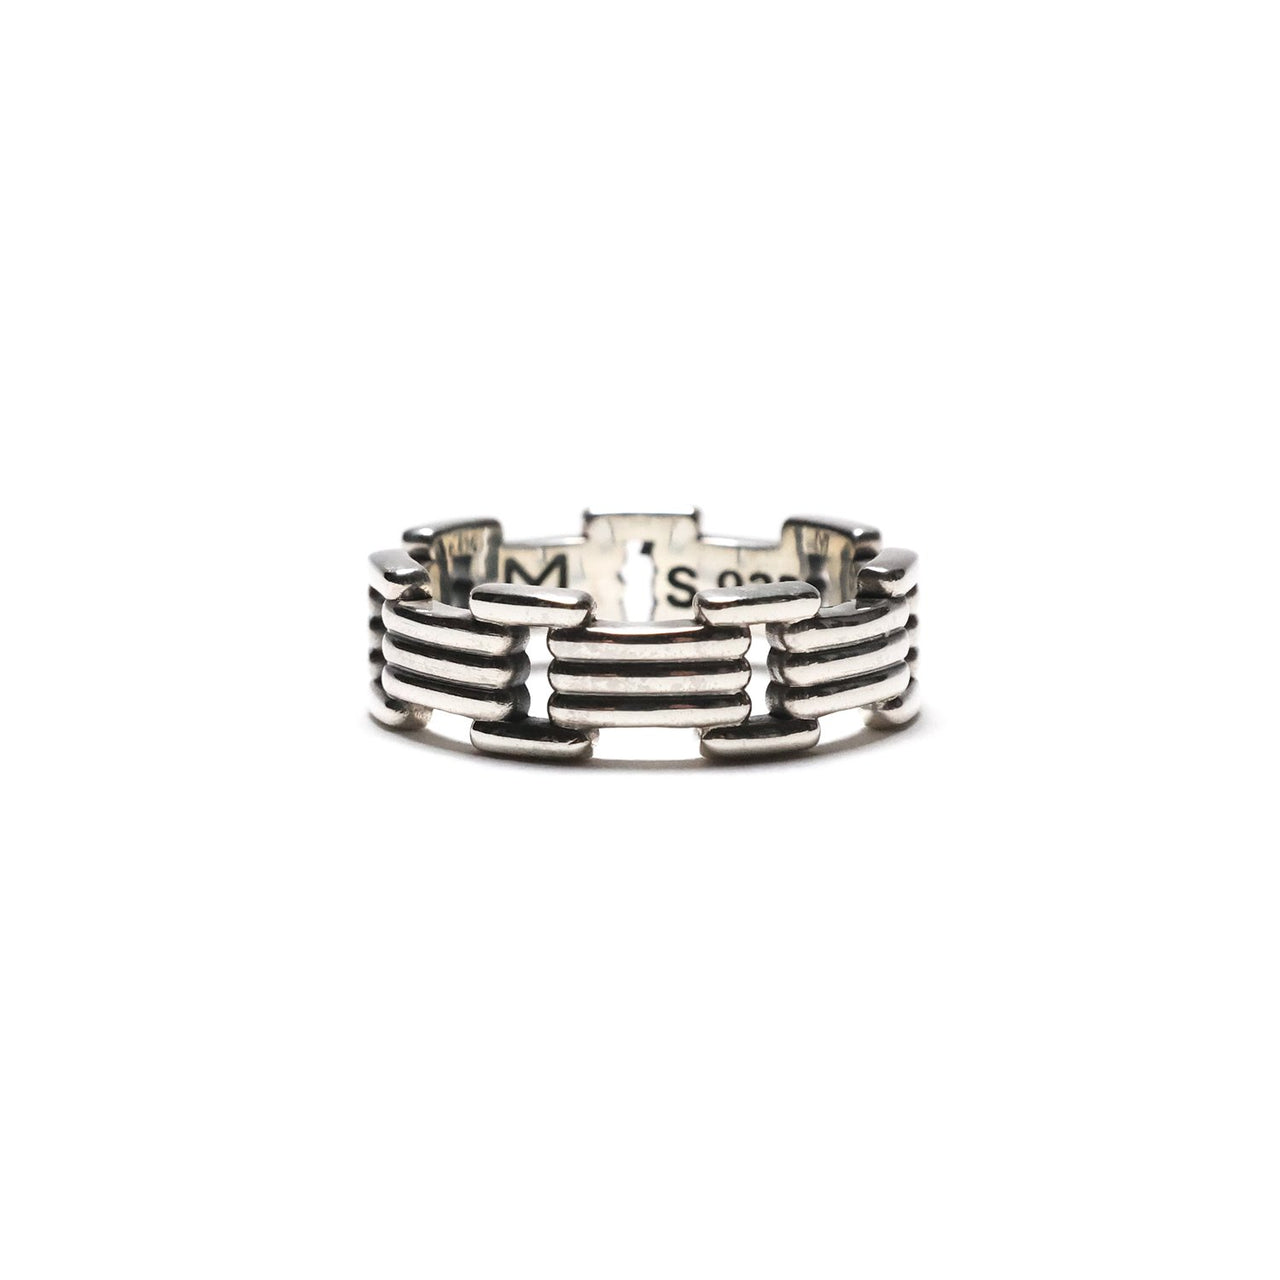 LUI LINK RING - SILVER